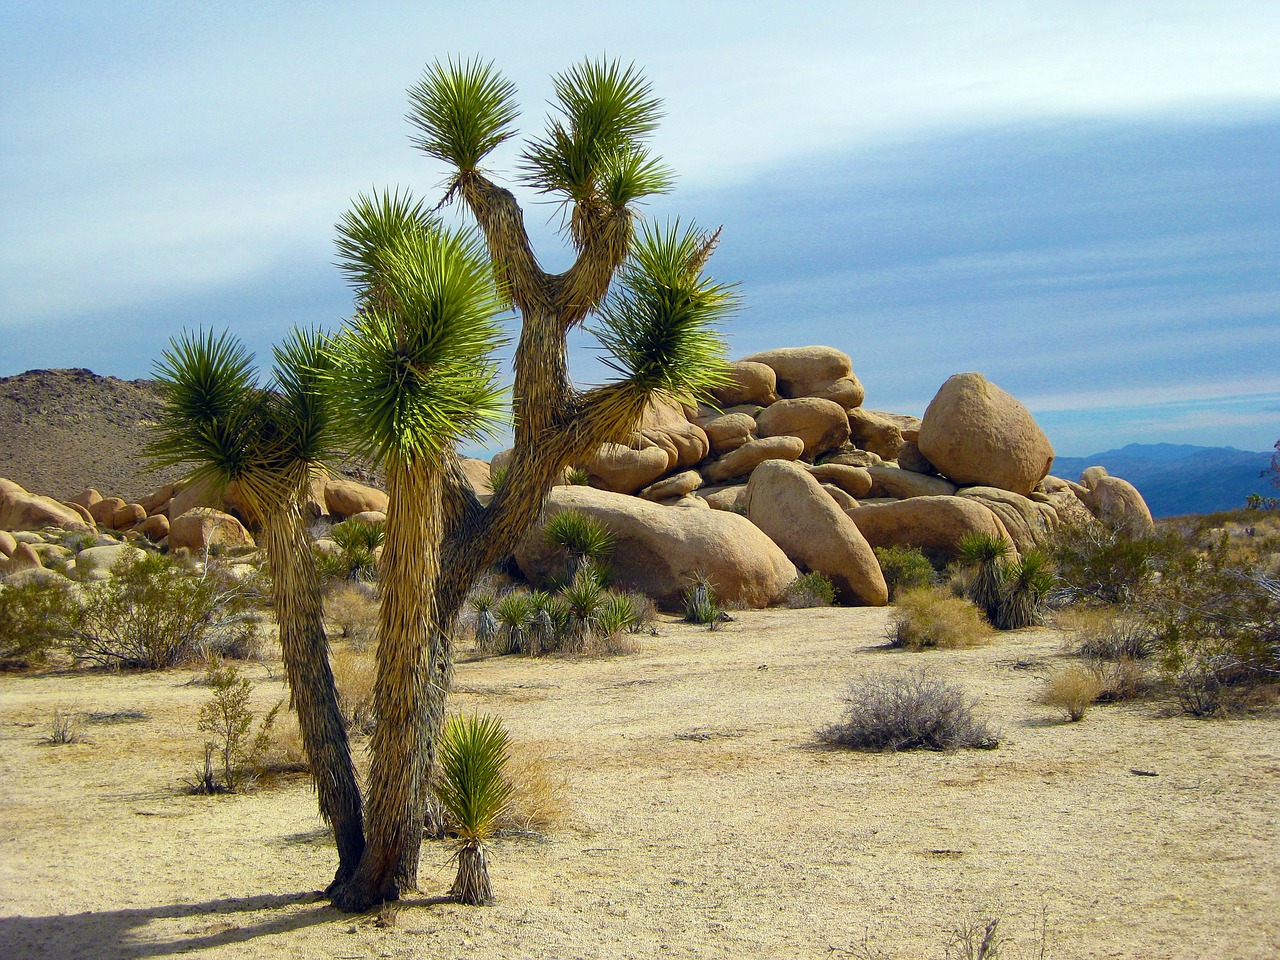 A Relaxing Day in Joshua Tree National Park